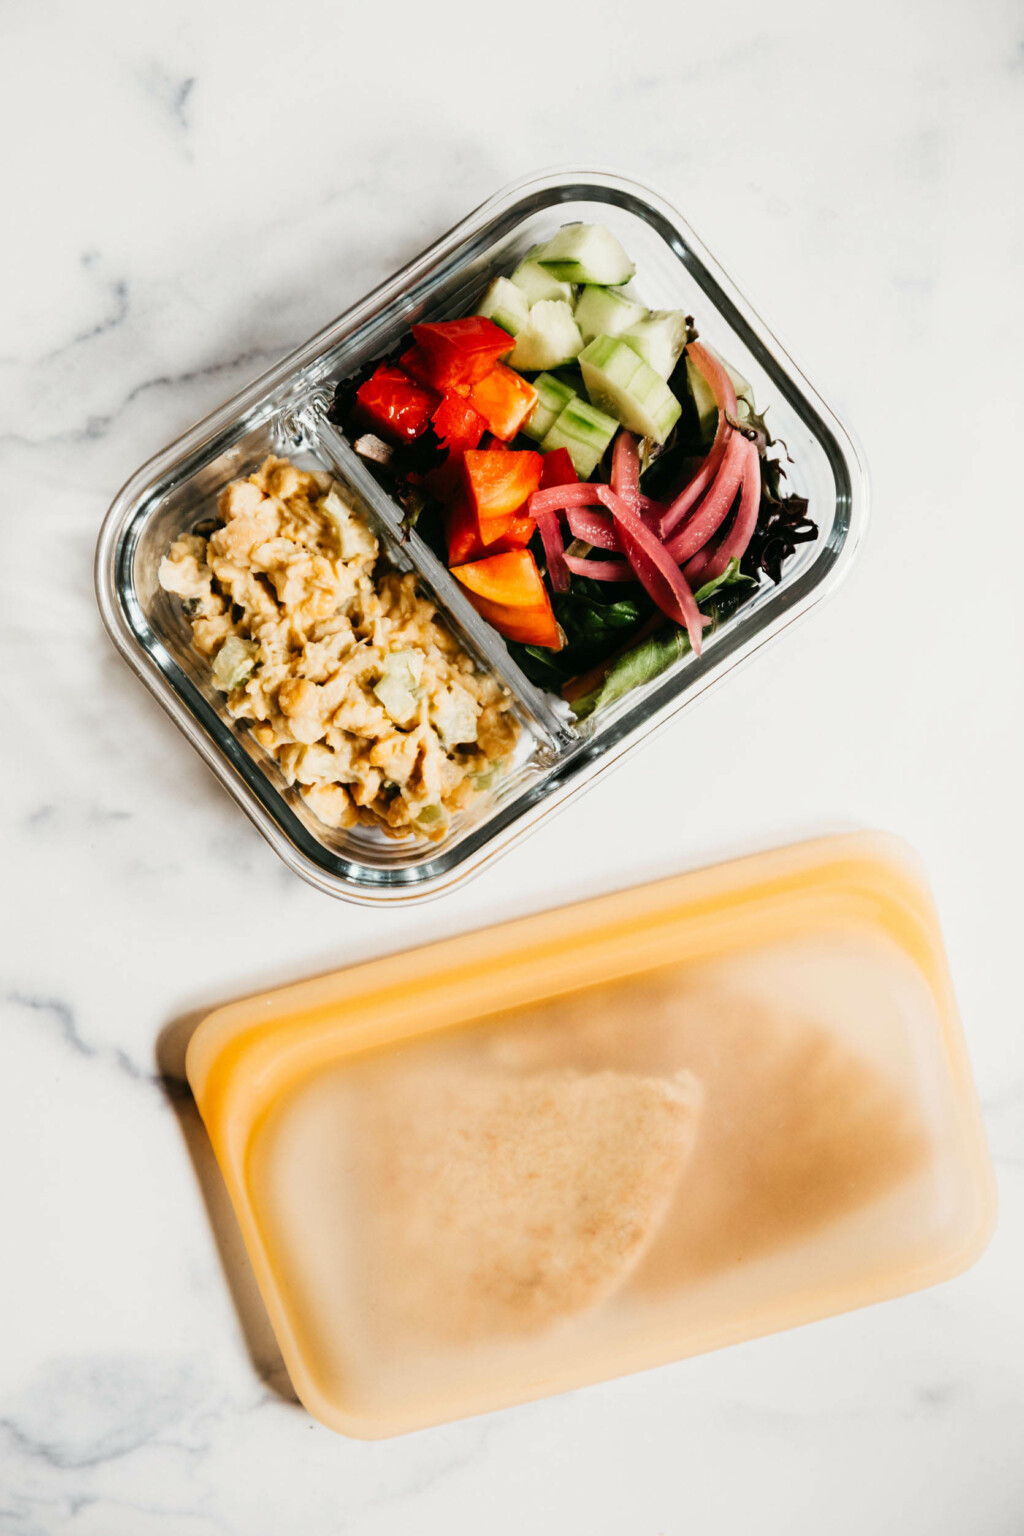 Plant-Based Meal Prep Bowls to Boost Energy and Nutrition!